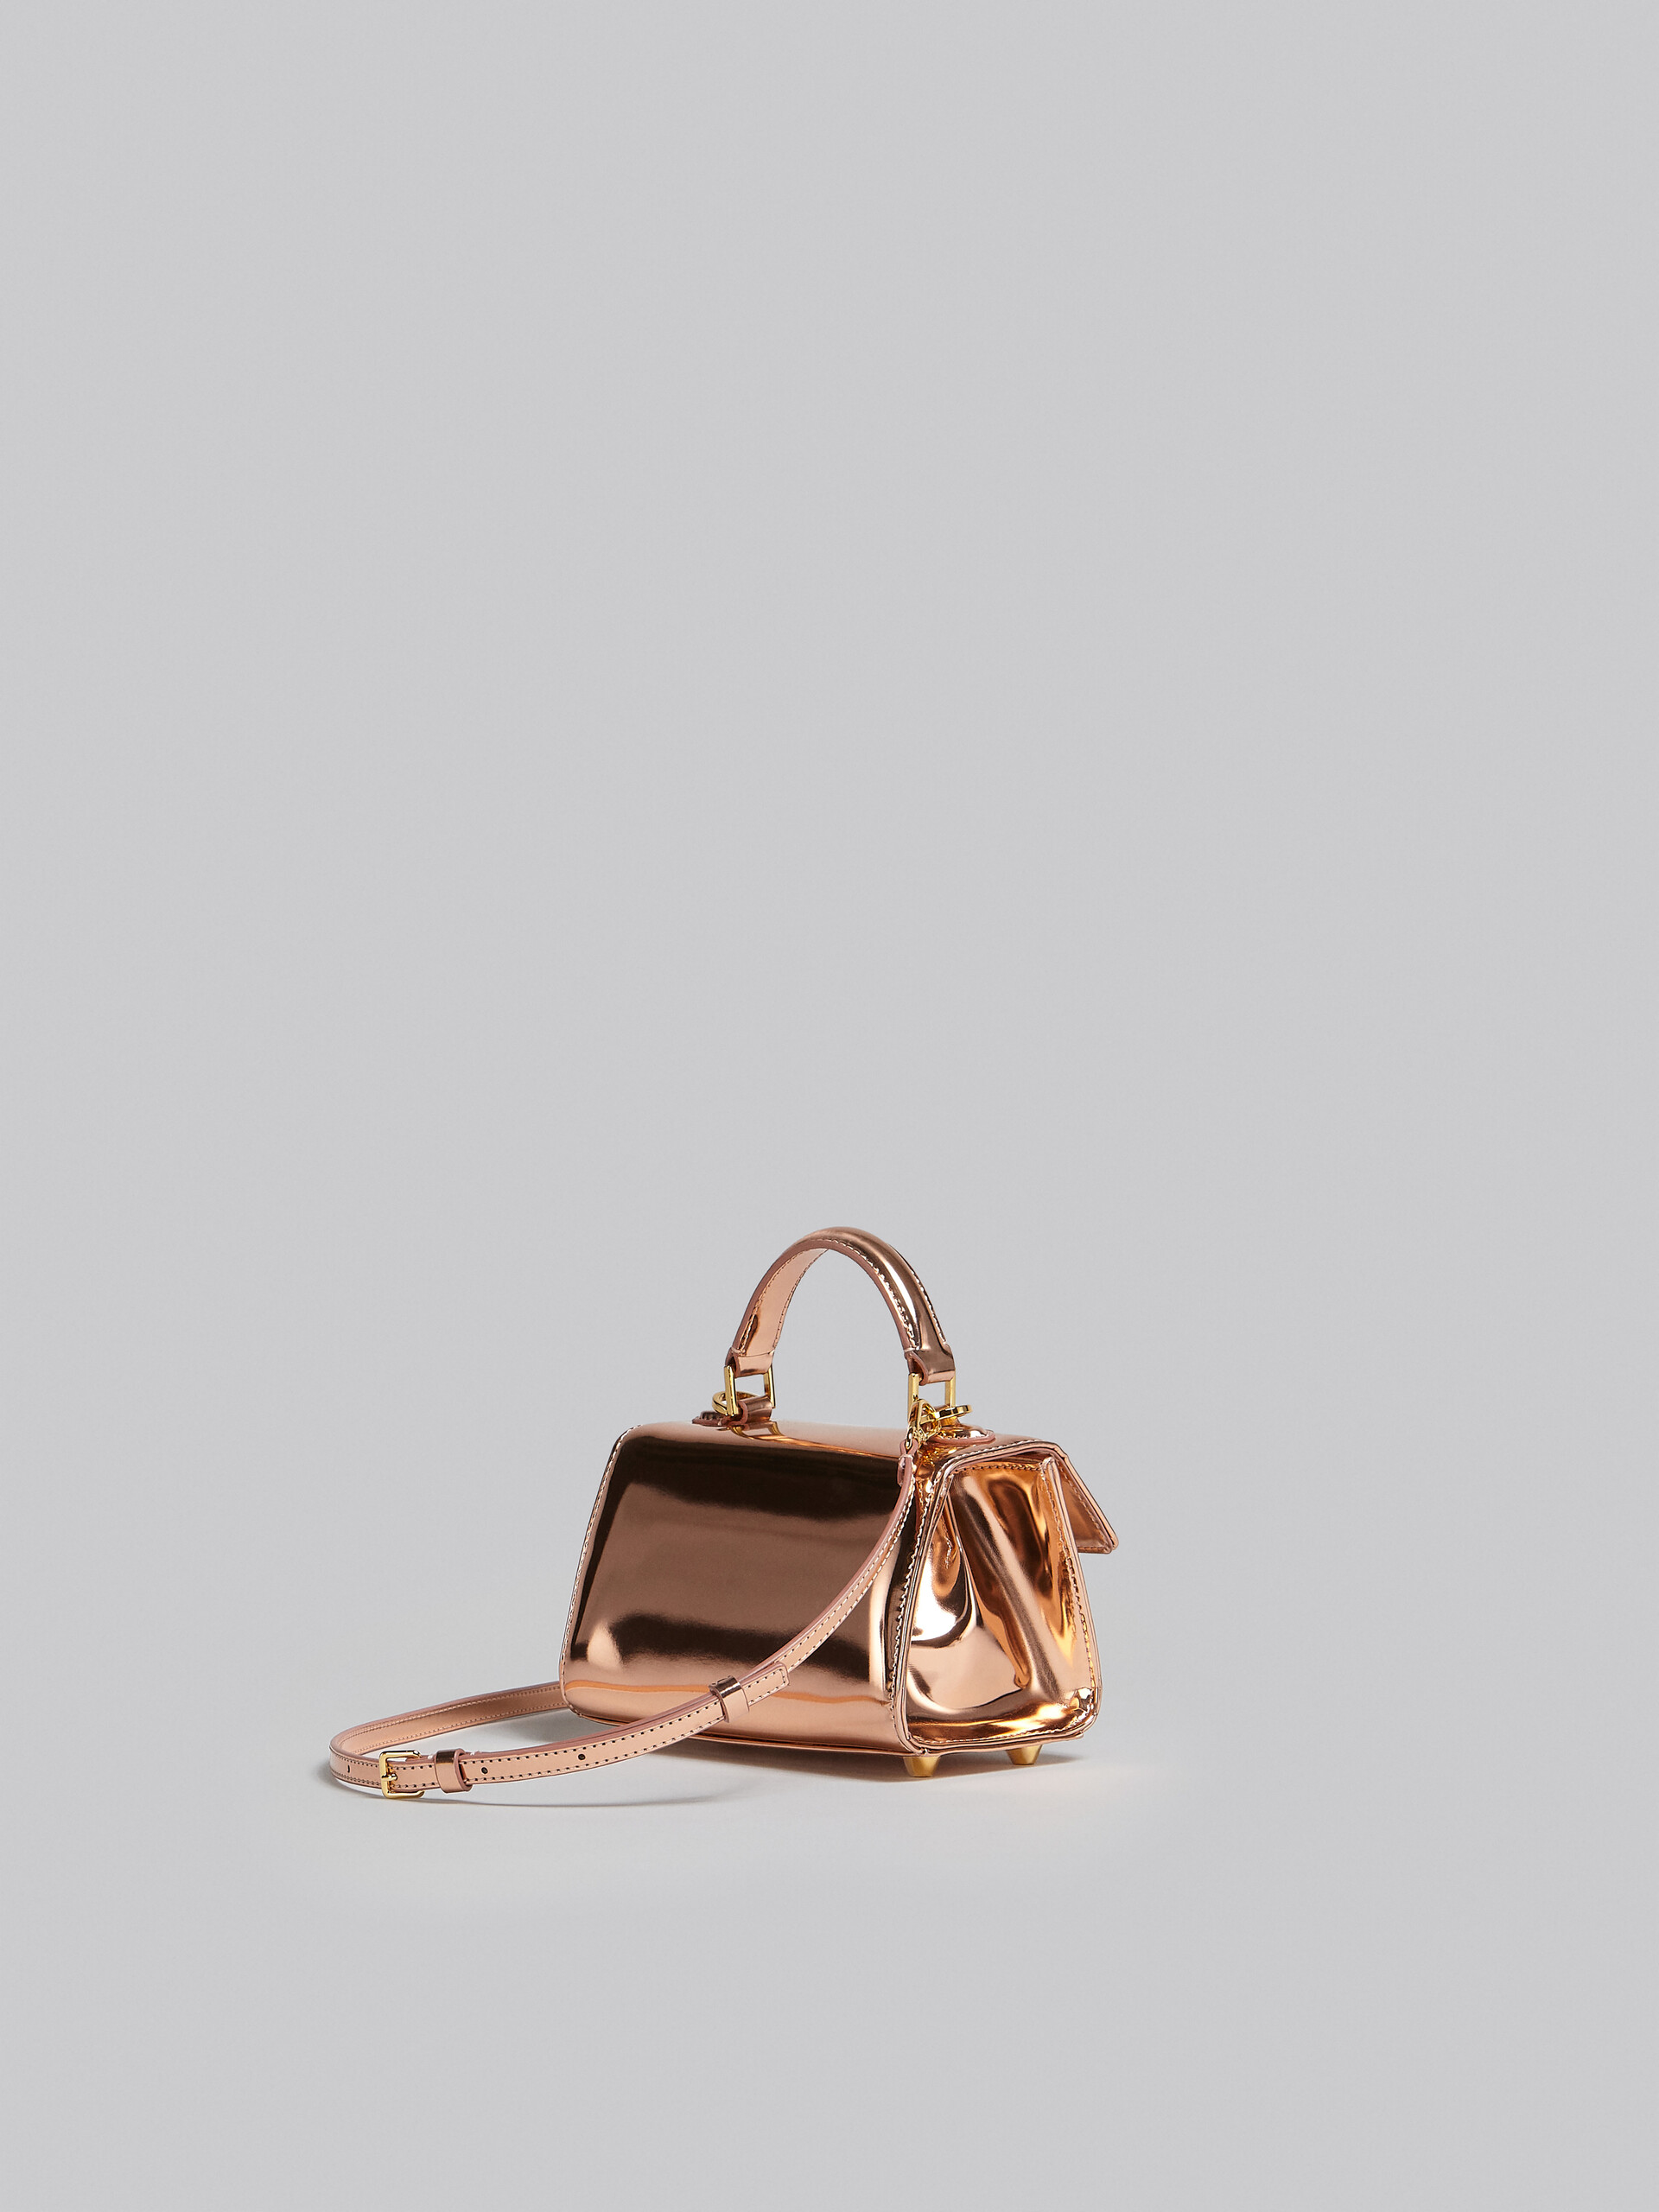 Relativity Mini Bag in rose gold mirrored leather